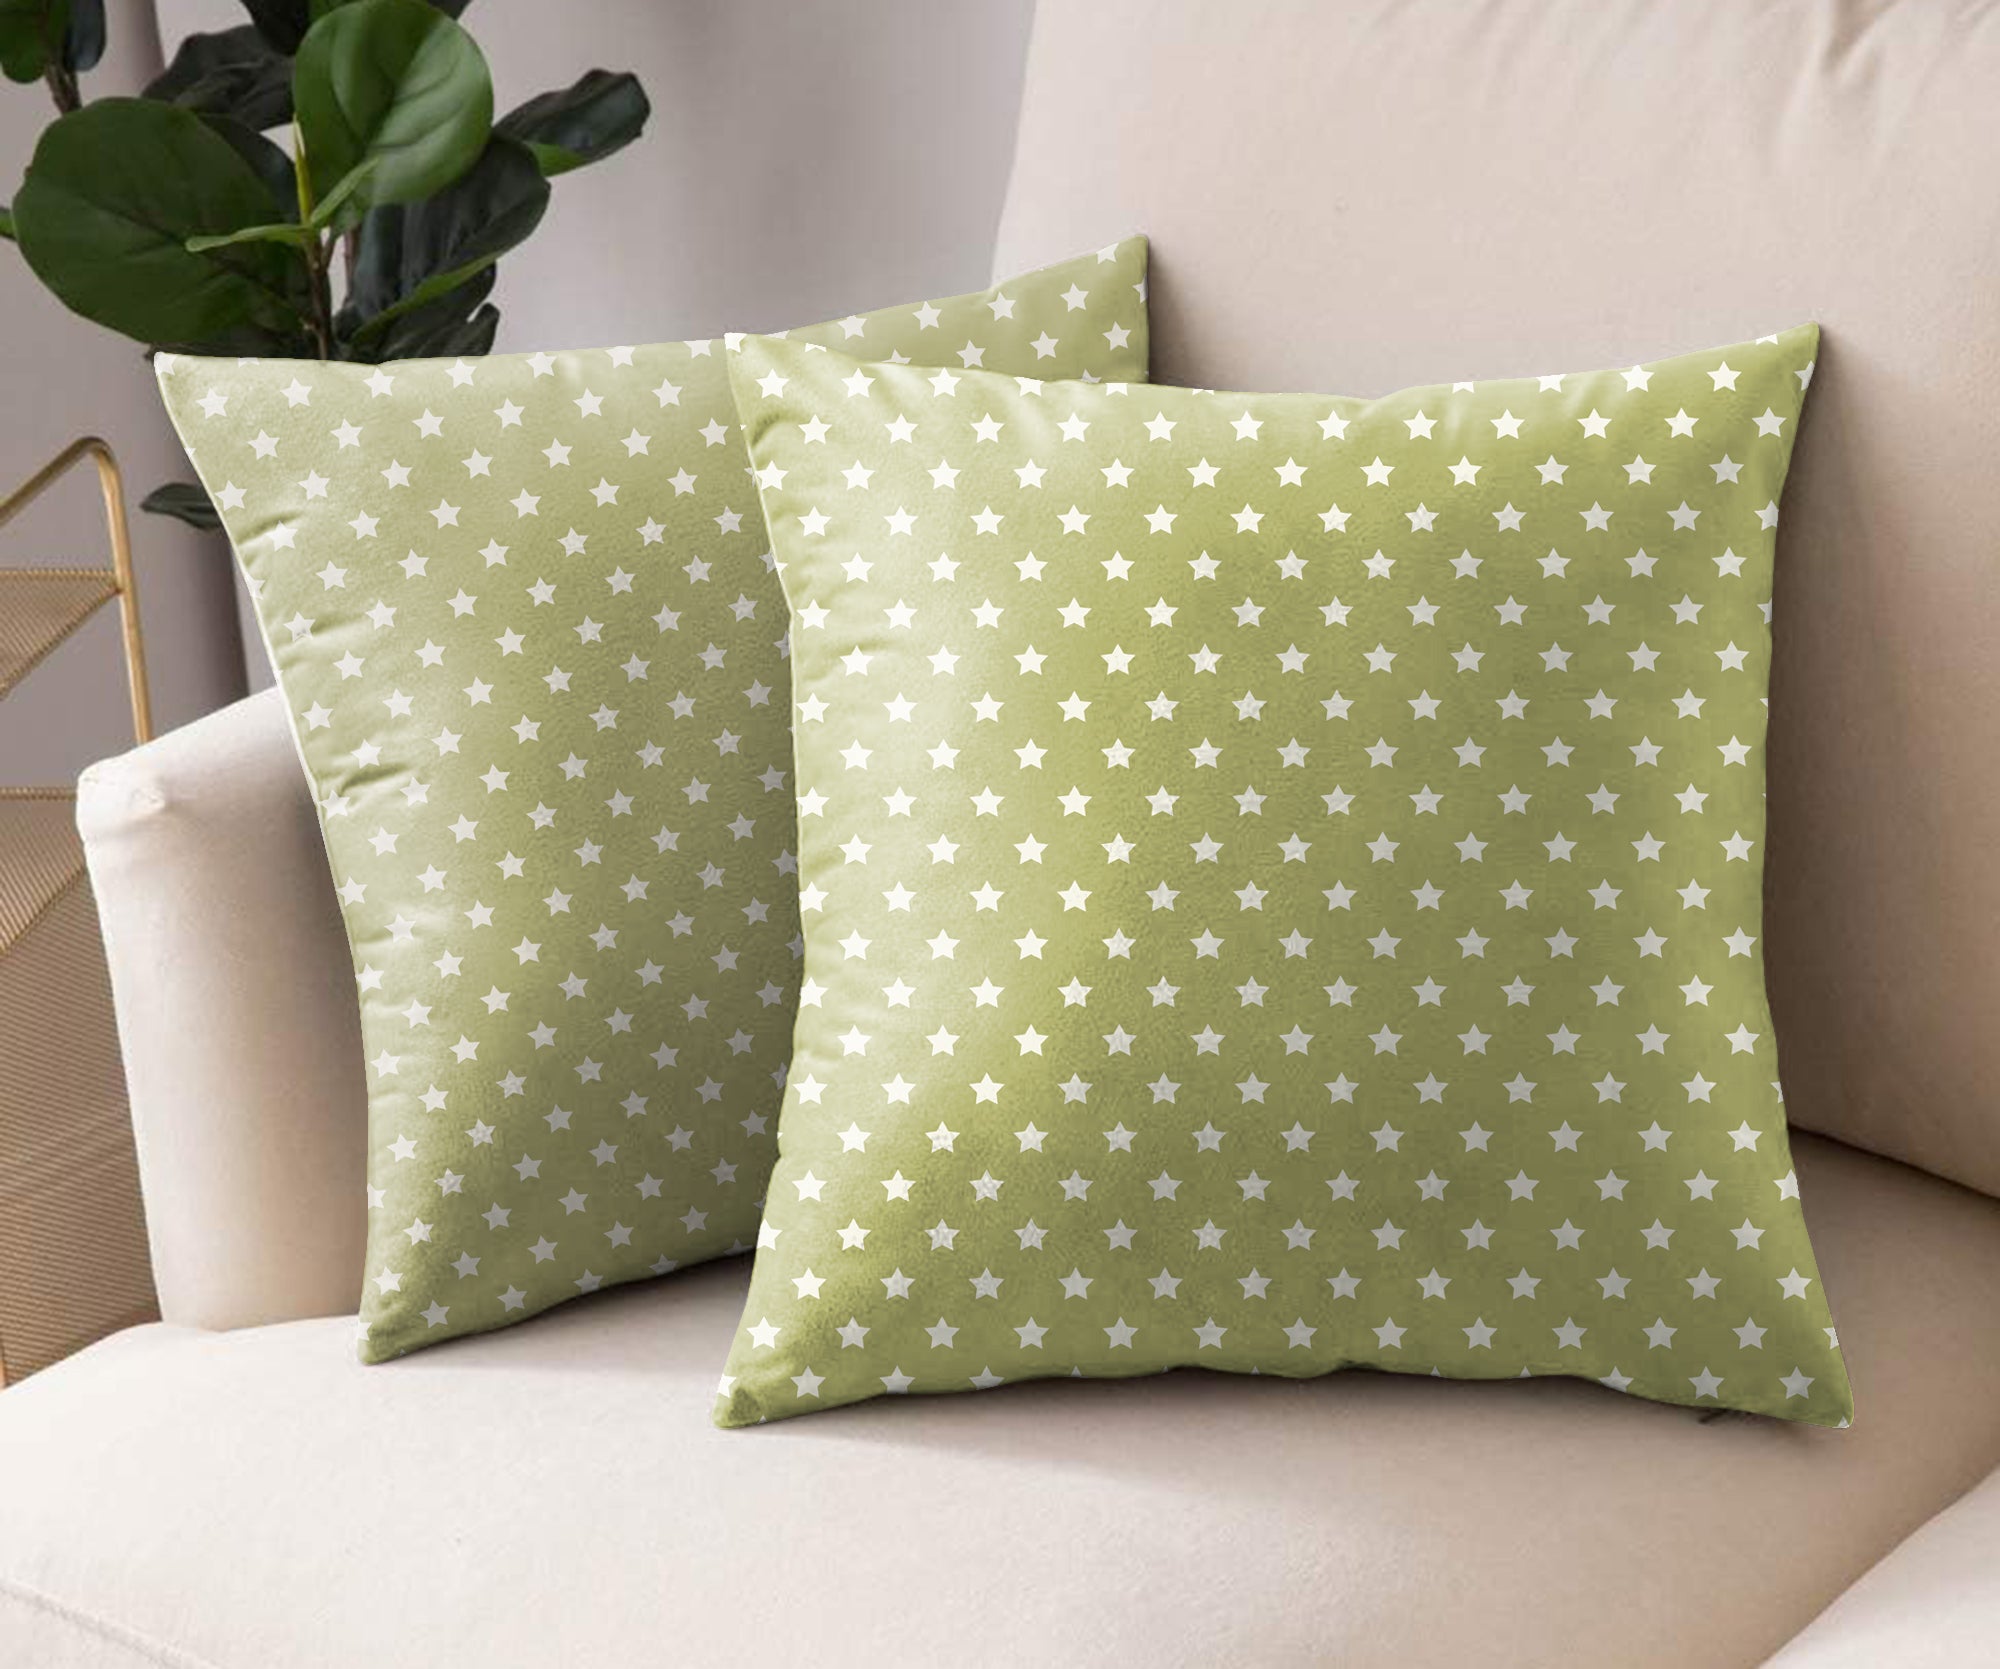 Spring Gallery Olive Green (16X16 INCH) Digital Printed Cushion Cover